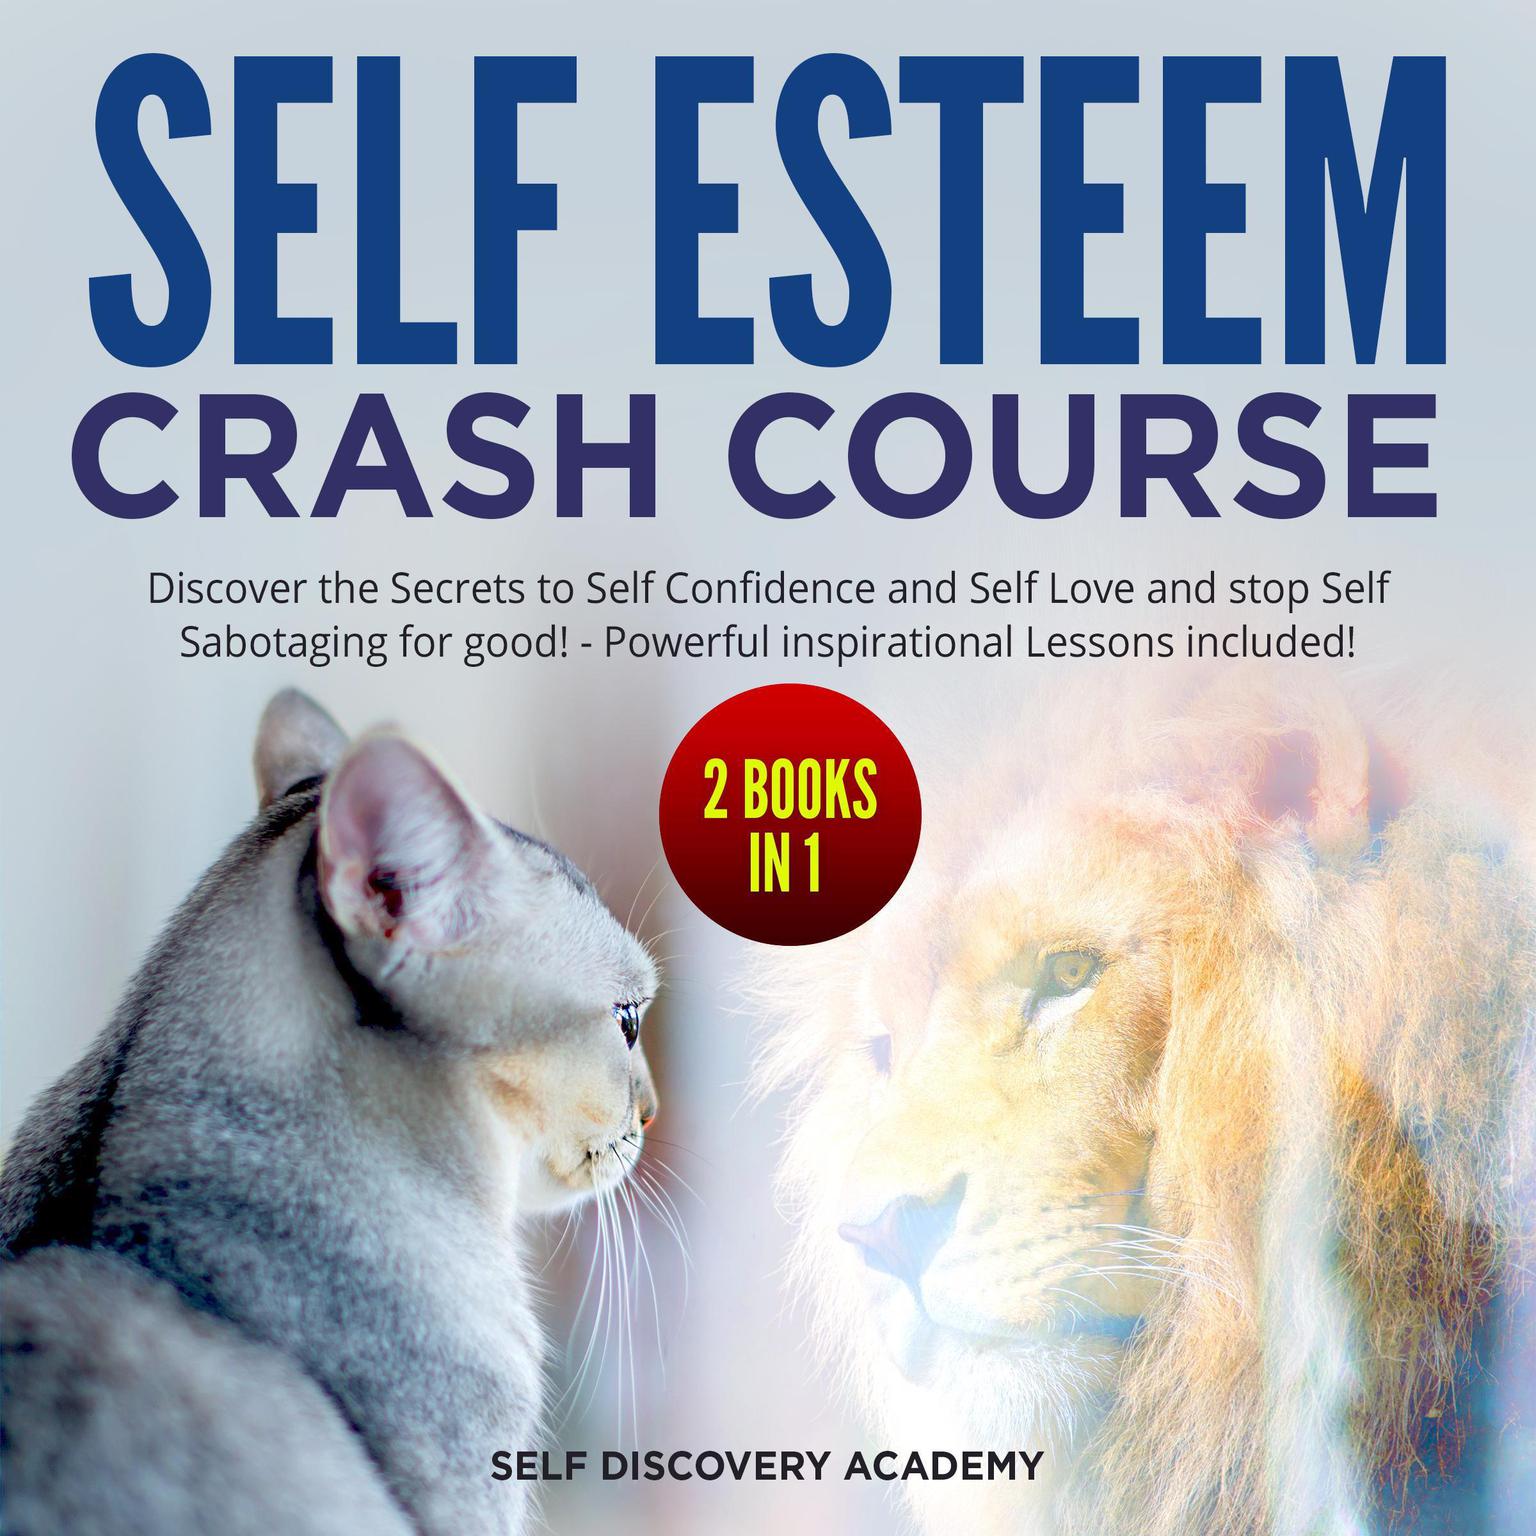 Self Esteem Crash Course – 2 Books in 1: : Discover the Secrets to Self Confidence and Self Love and stop Self Sabotaging for good! - Powerful inspirational Lessons included! Audiobook, by Self Discovery Academy